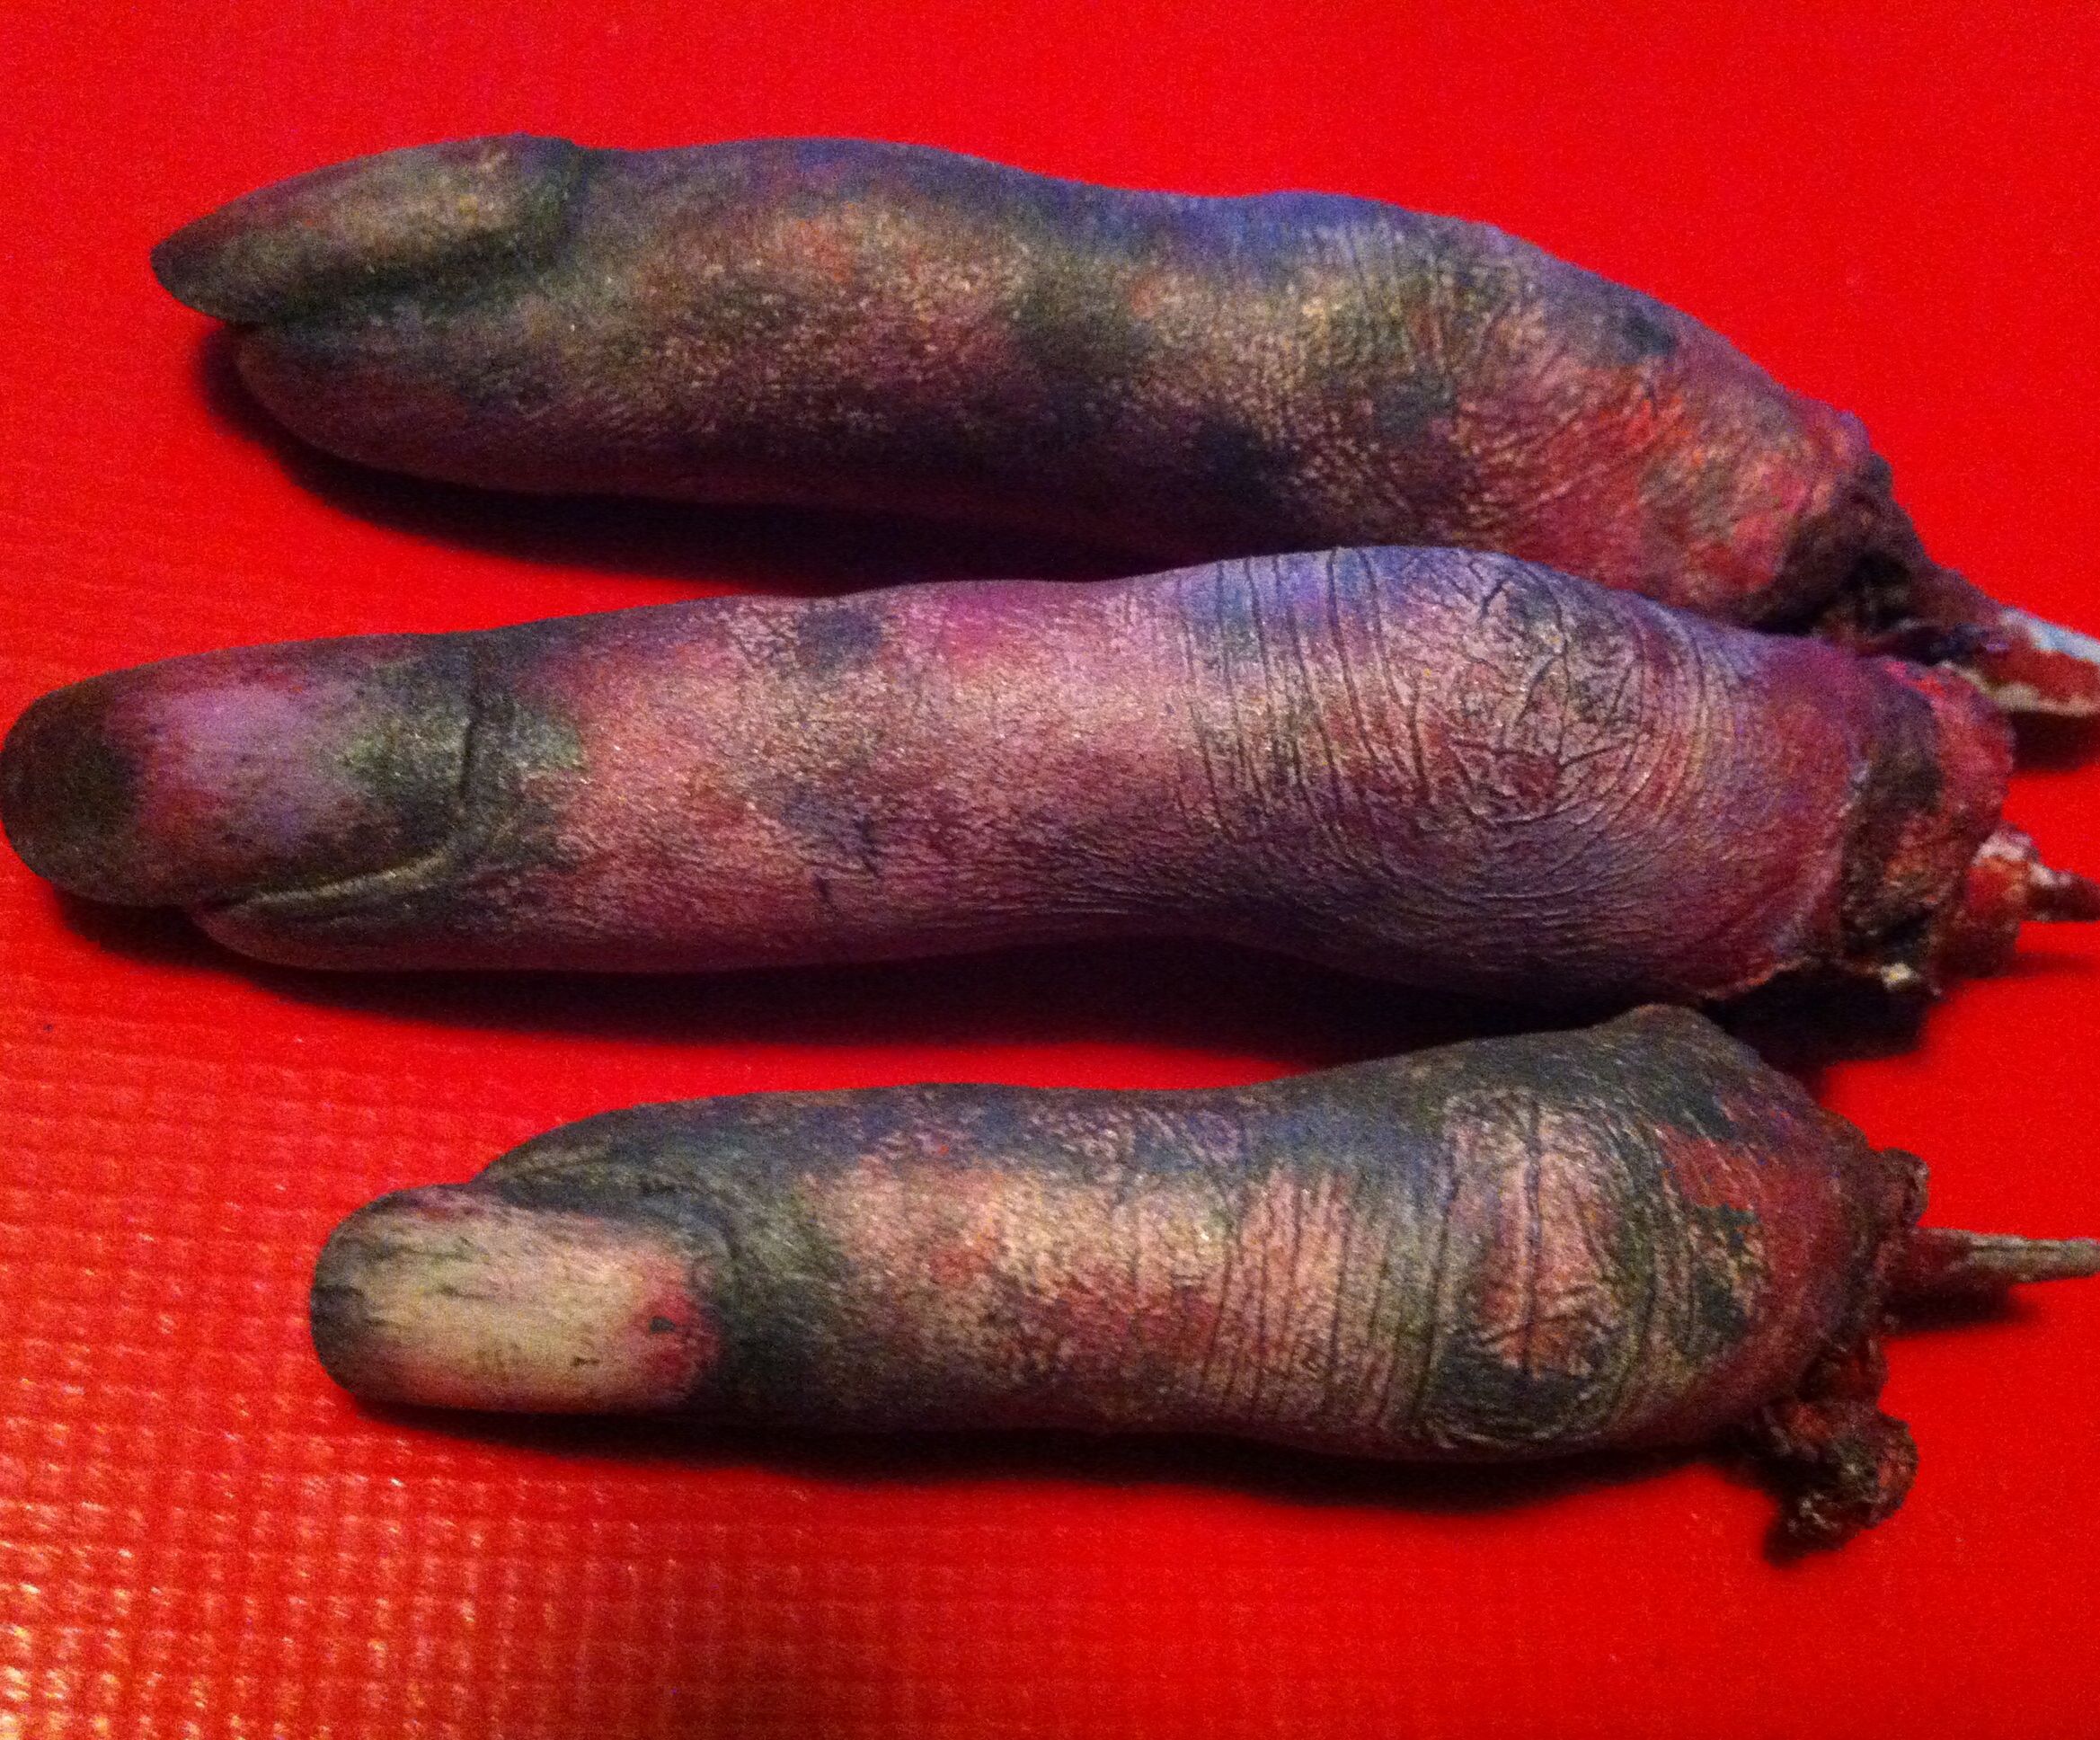 Simple severed fingers